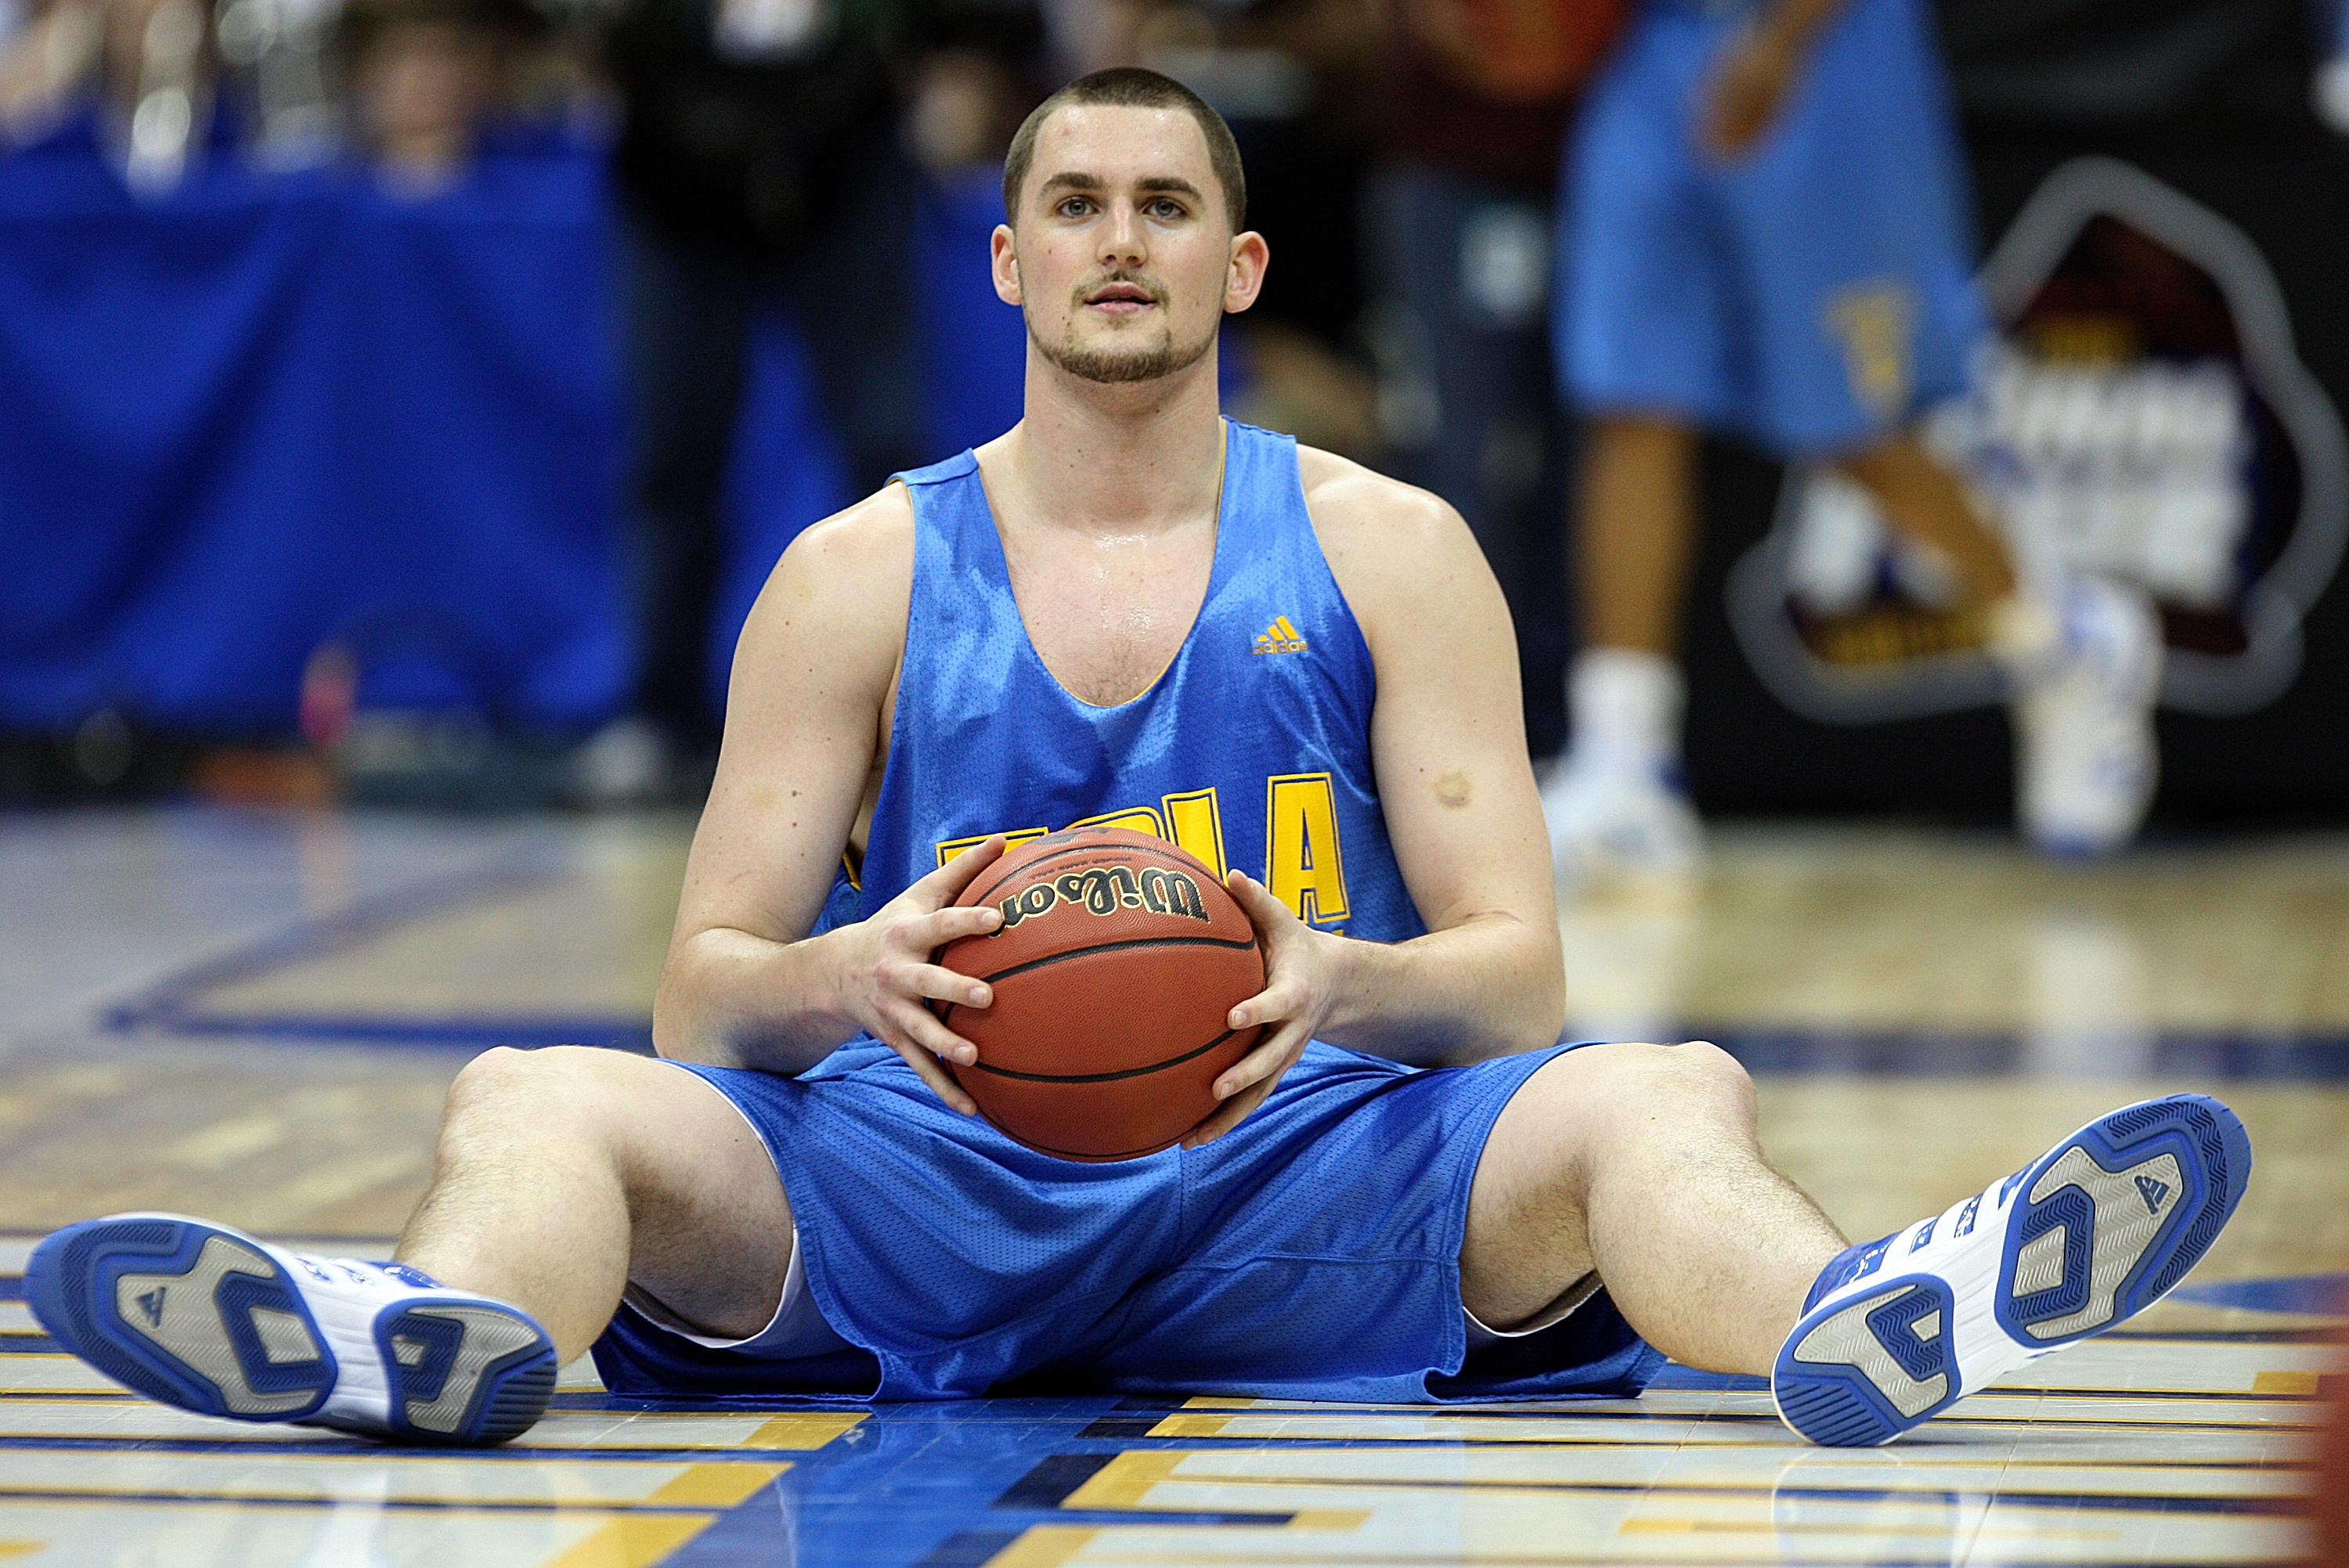 Kevin Love Leaned on John Wooden While at UCLA: ‘He’s Always Going to Give You the Best Advice’